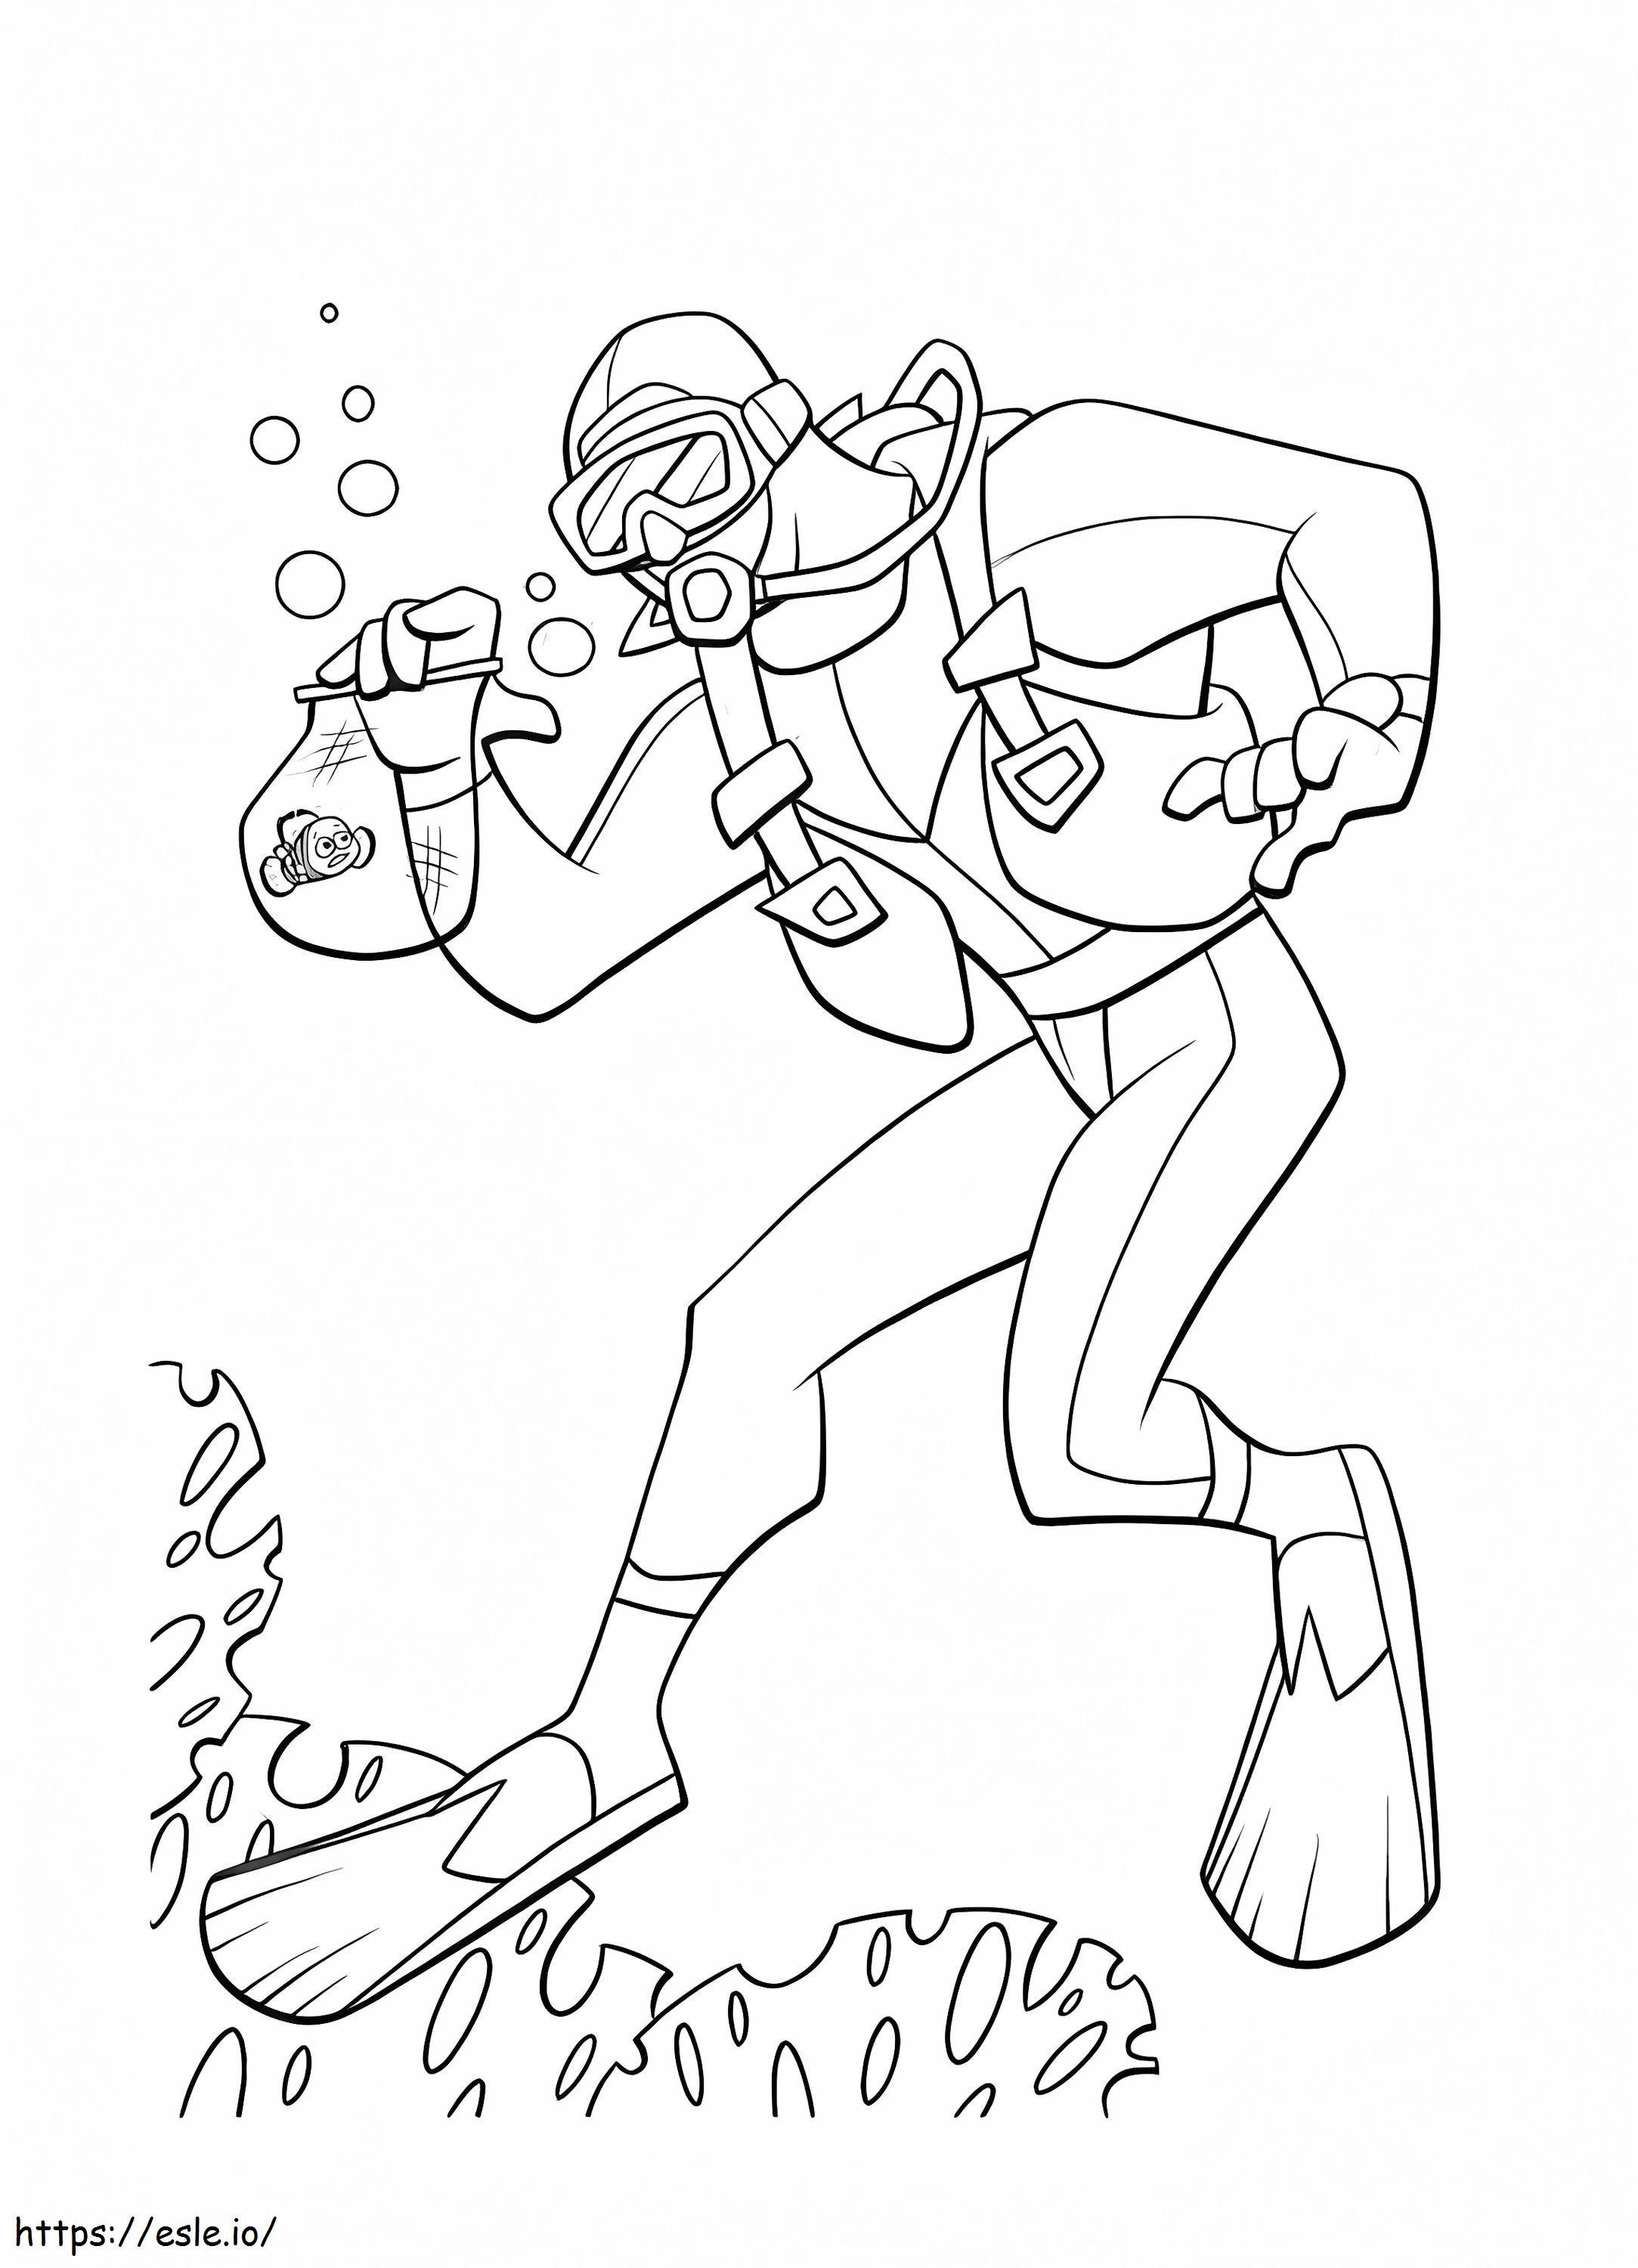 Diver Fishing coloring page